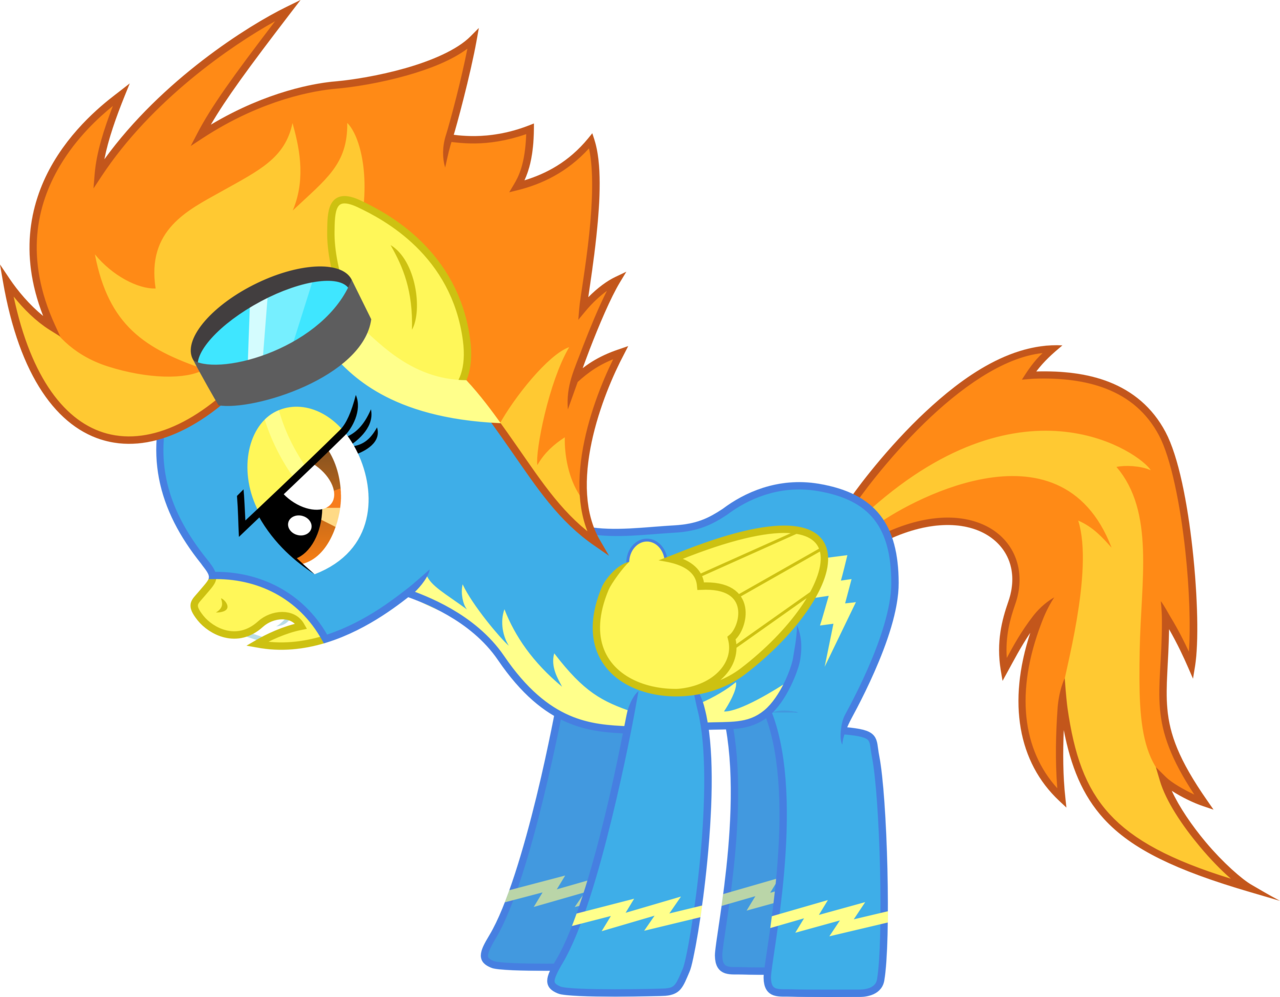 Angry Spitfire By D4svader Angry Spitfire By D4svader - My Little Pony Spitfire Angry (1280x997)